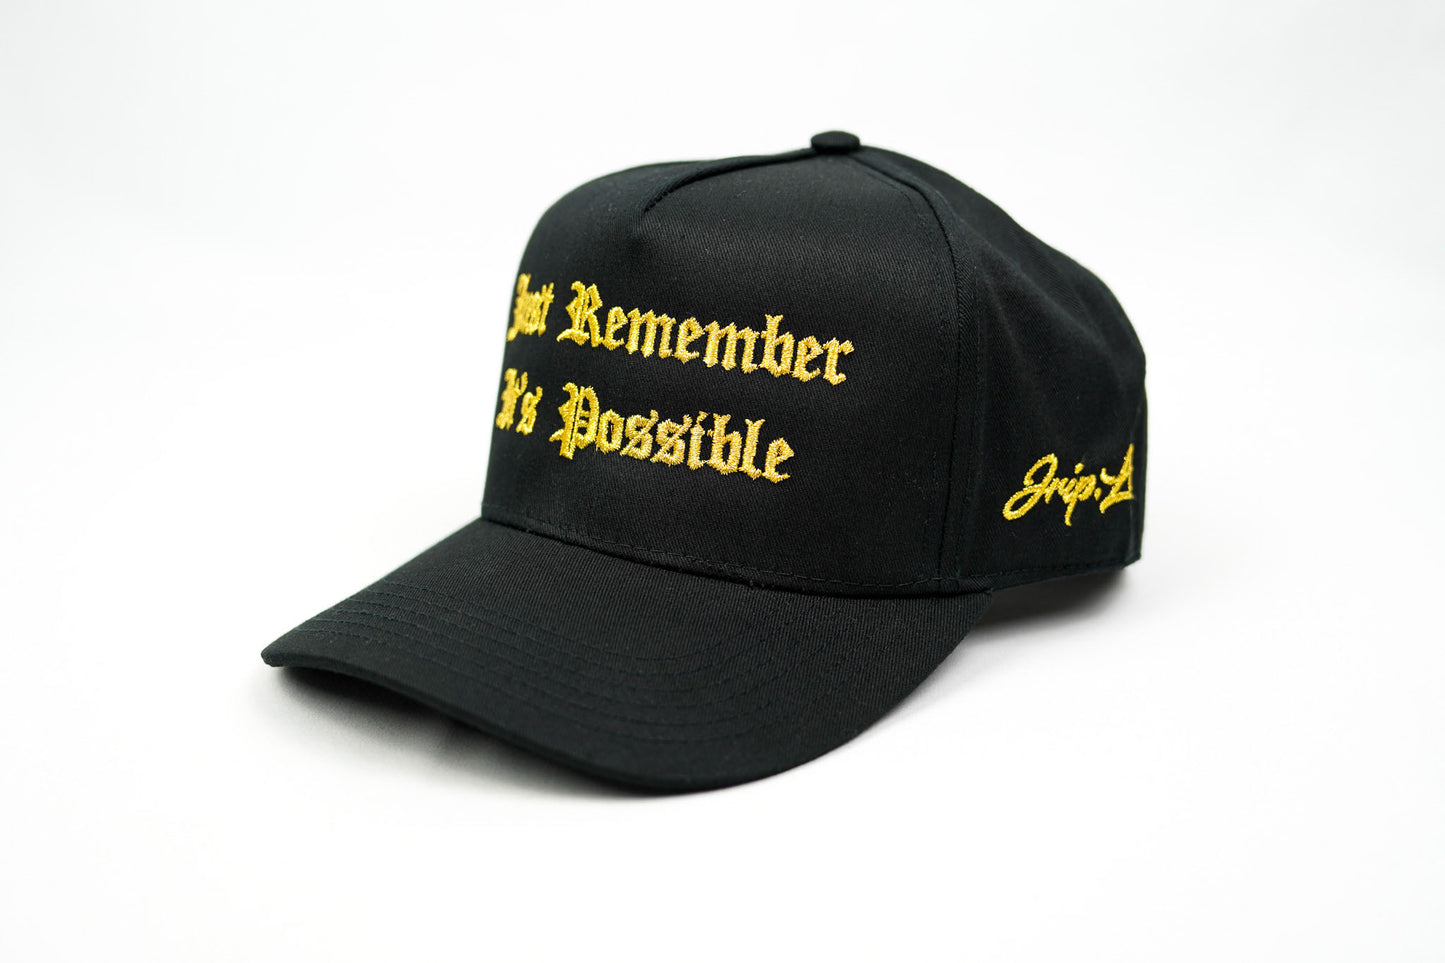 Just Remember It's Possible Snapback (BLACK/GOLD)